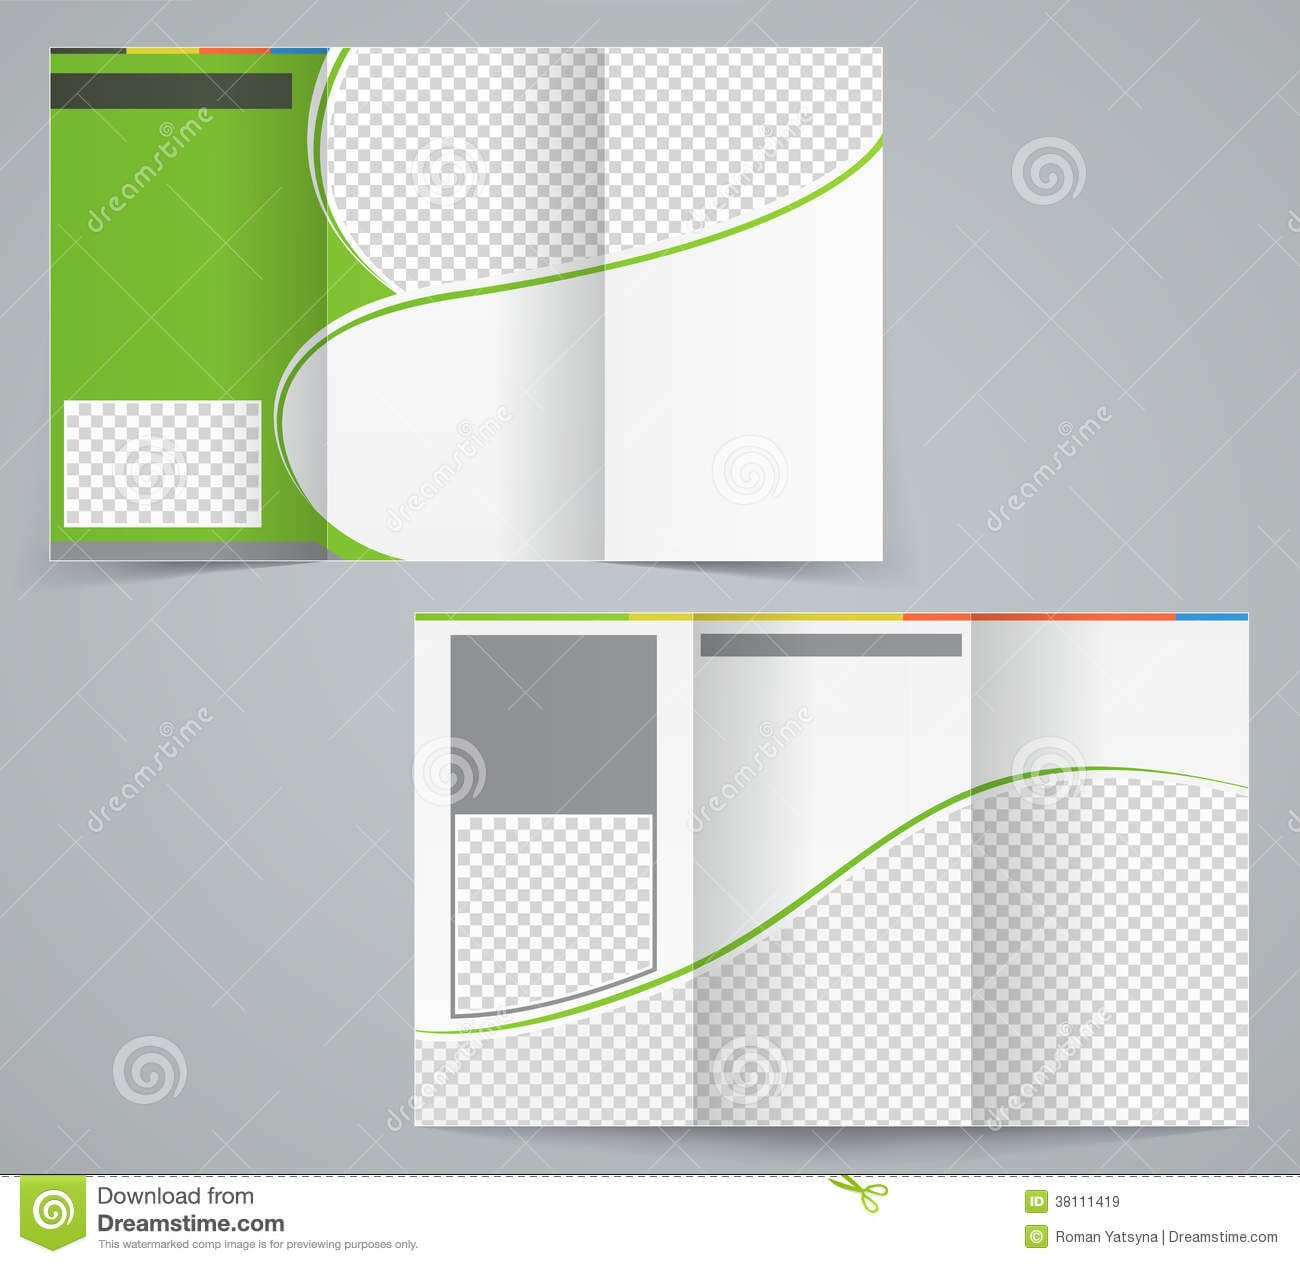 99E Illustrator Brochure Templates | Wiring Library For Ai Brochure Templates Free Download